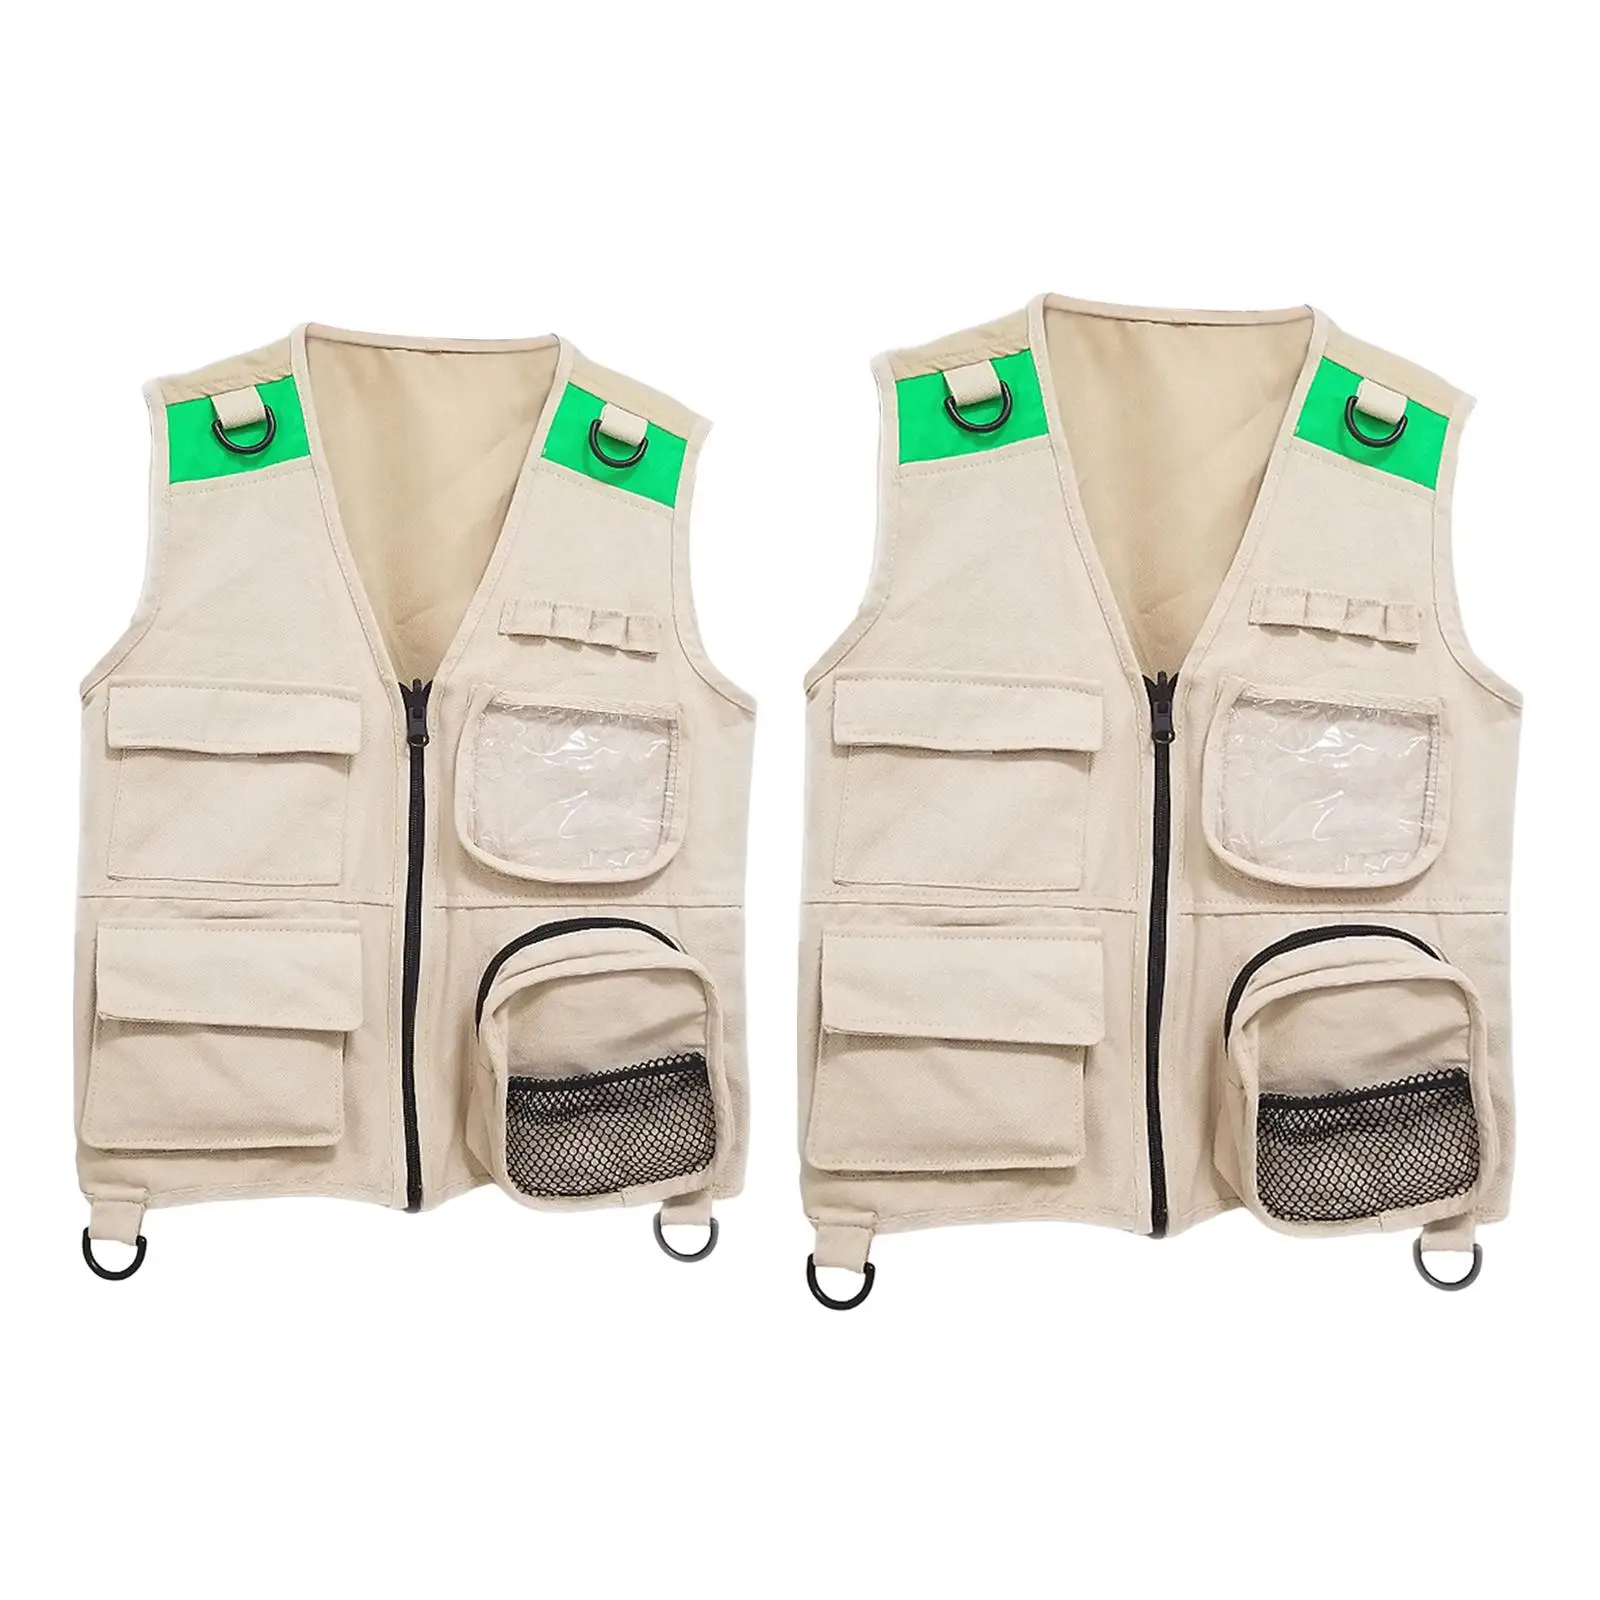 Kids Costume Vest with 4 Pockets for Outdoor Party Favors Young Children Boys Girls